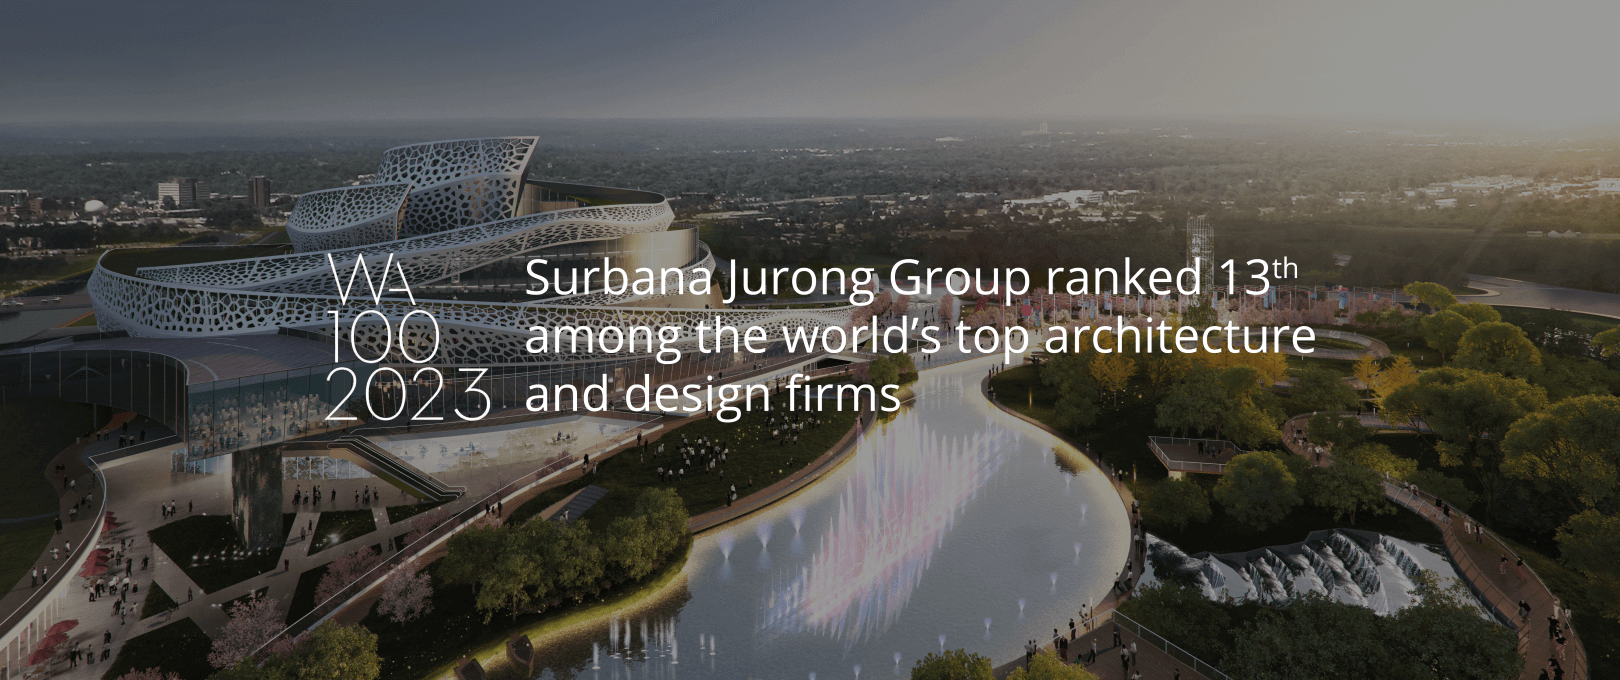 https://surbanajurong.com/resources/press-releases/surbana-jurong-group-ranks-13th-among-architecture-firms-globally/